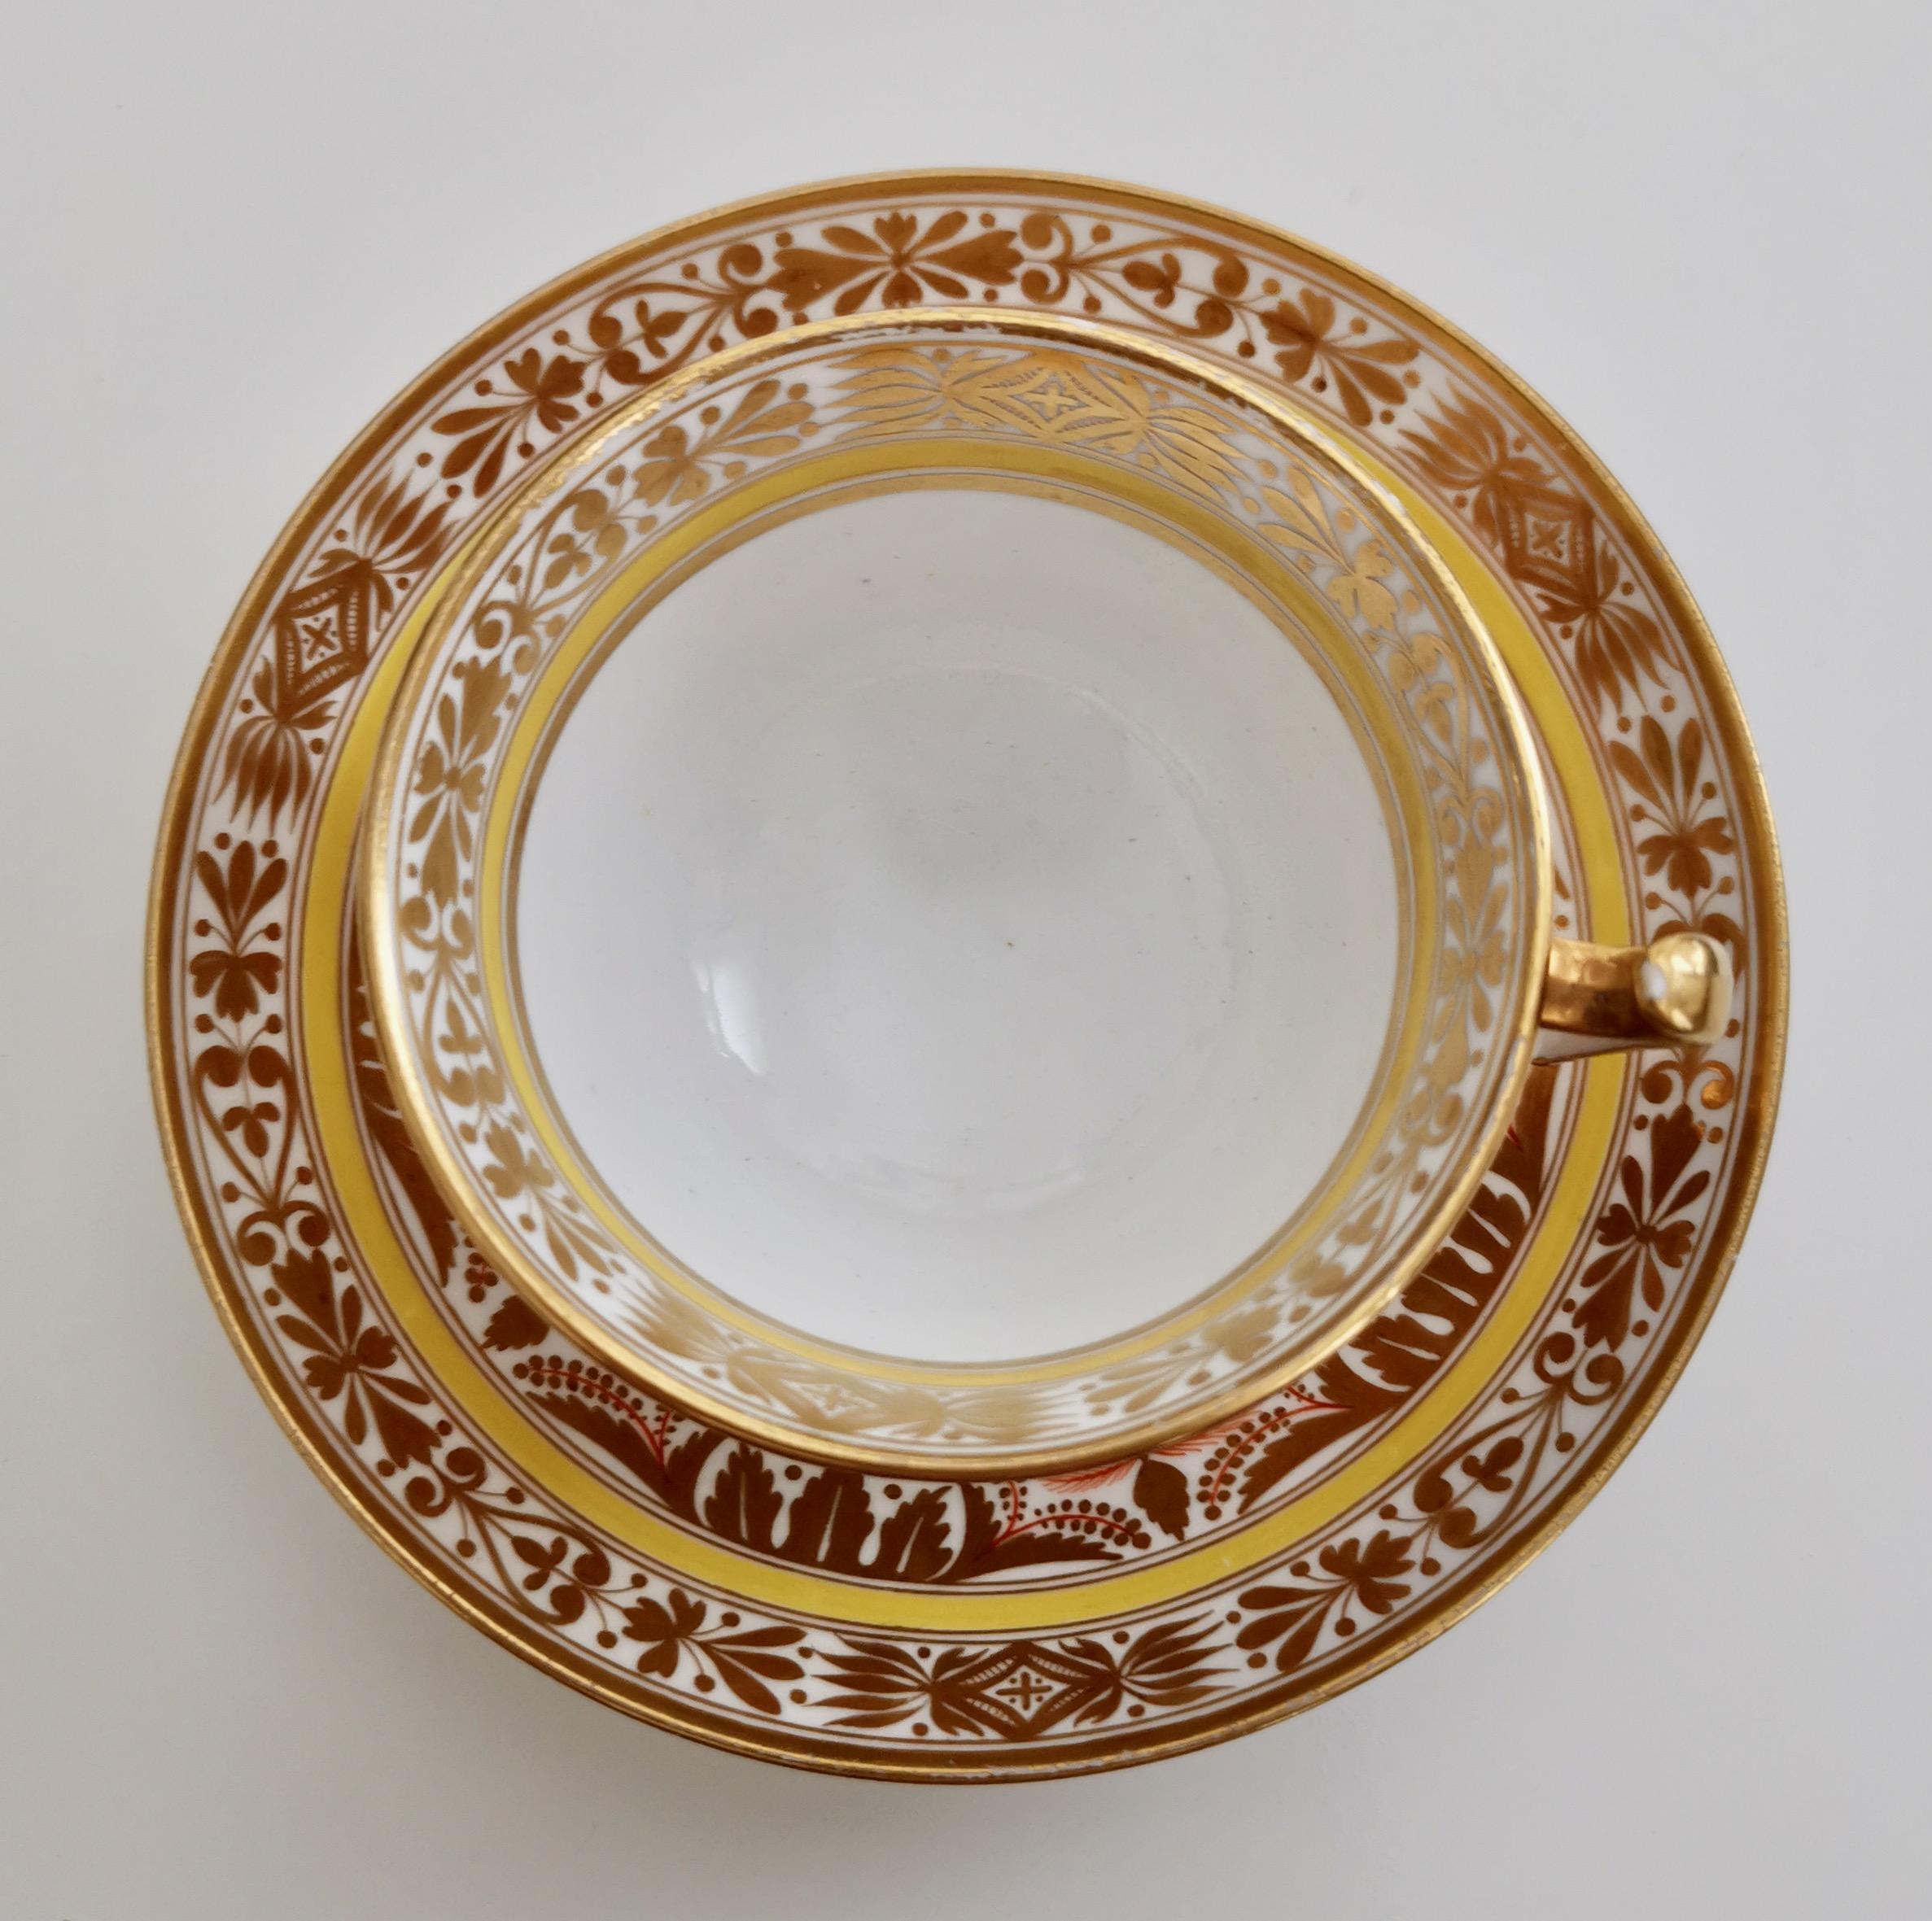 Spode Porcelain Teacup Set, Gilt, Yellow and Red Regency Pattern, circa 1815 4